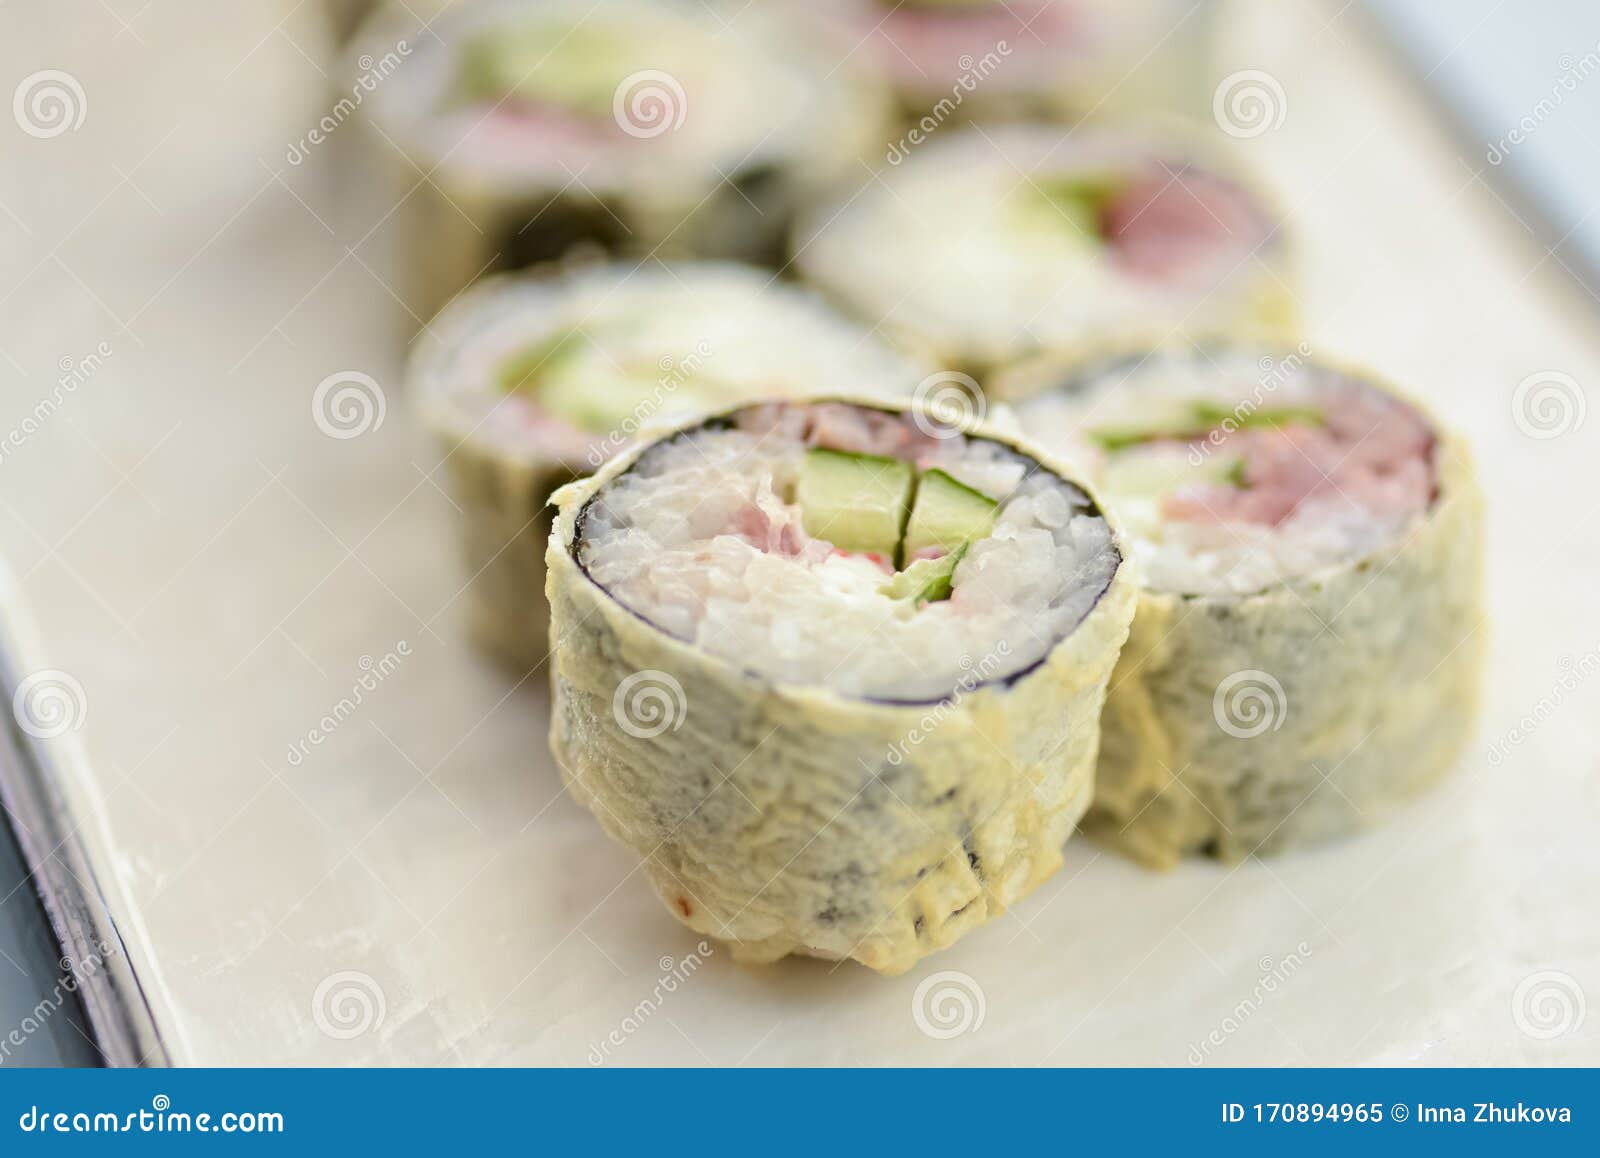 Maki Sushi California Fried Hot Rolls with Fresh Salmon, Cucumber and Cream  Cheese Philadelphia Inside on White Plate Stock Image - Image of roll,  rice: 170894965